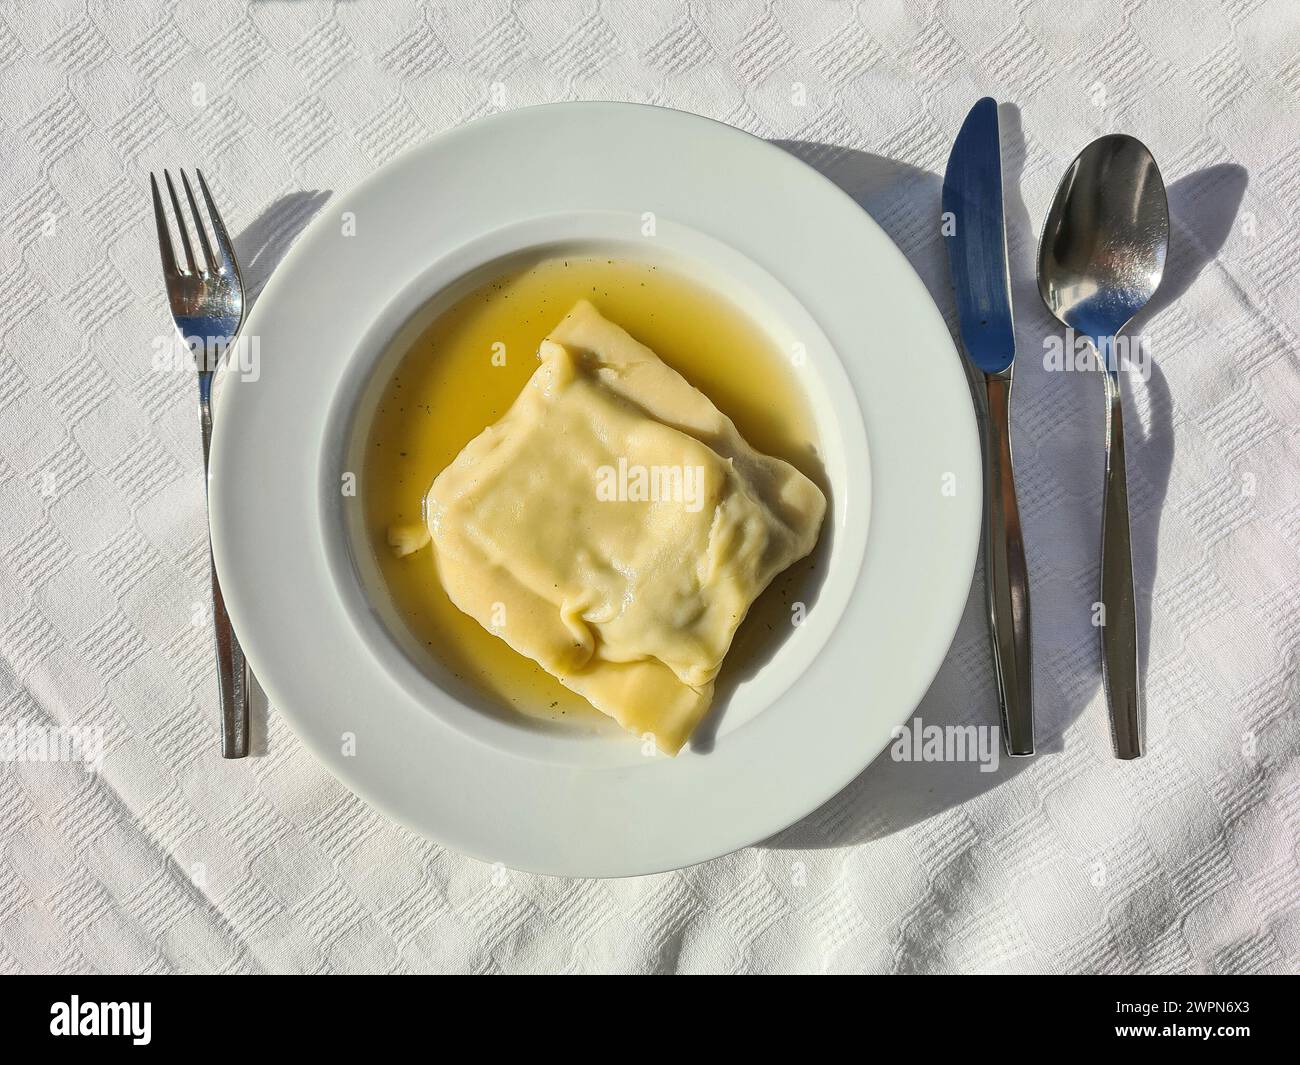 Specialty - Swabian pasta squares in vegetable broth served as a hot meal in a deep soup plate Stock Photo